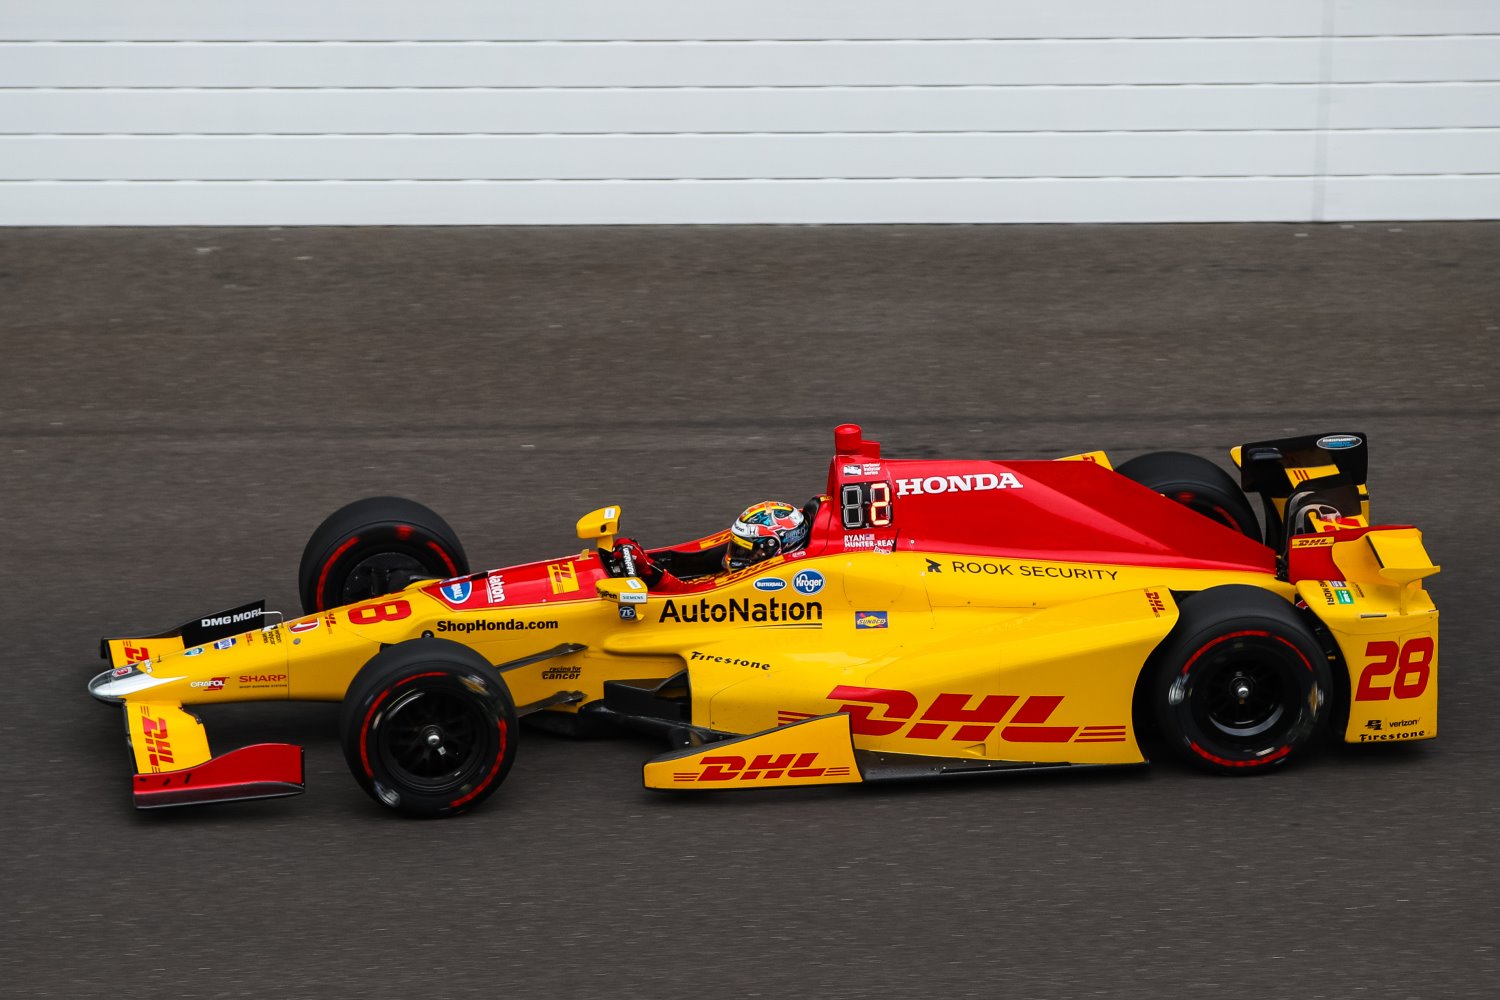 Ryan Hunter-Reay is set for next year with Andretti Autosport but he claims to have no knowledge of what engine will be in his car.  It will be a Chevy according to AR1 sources.